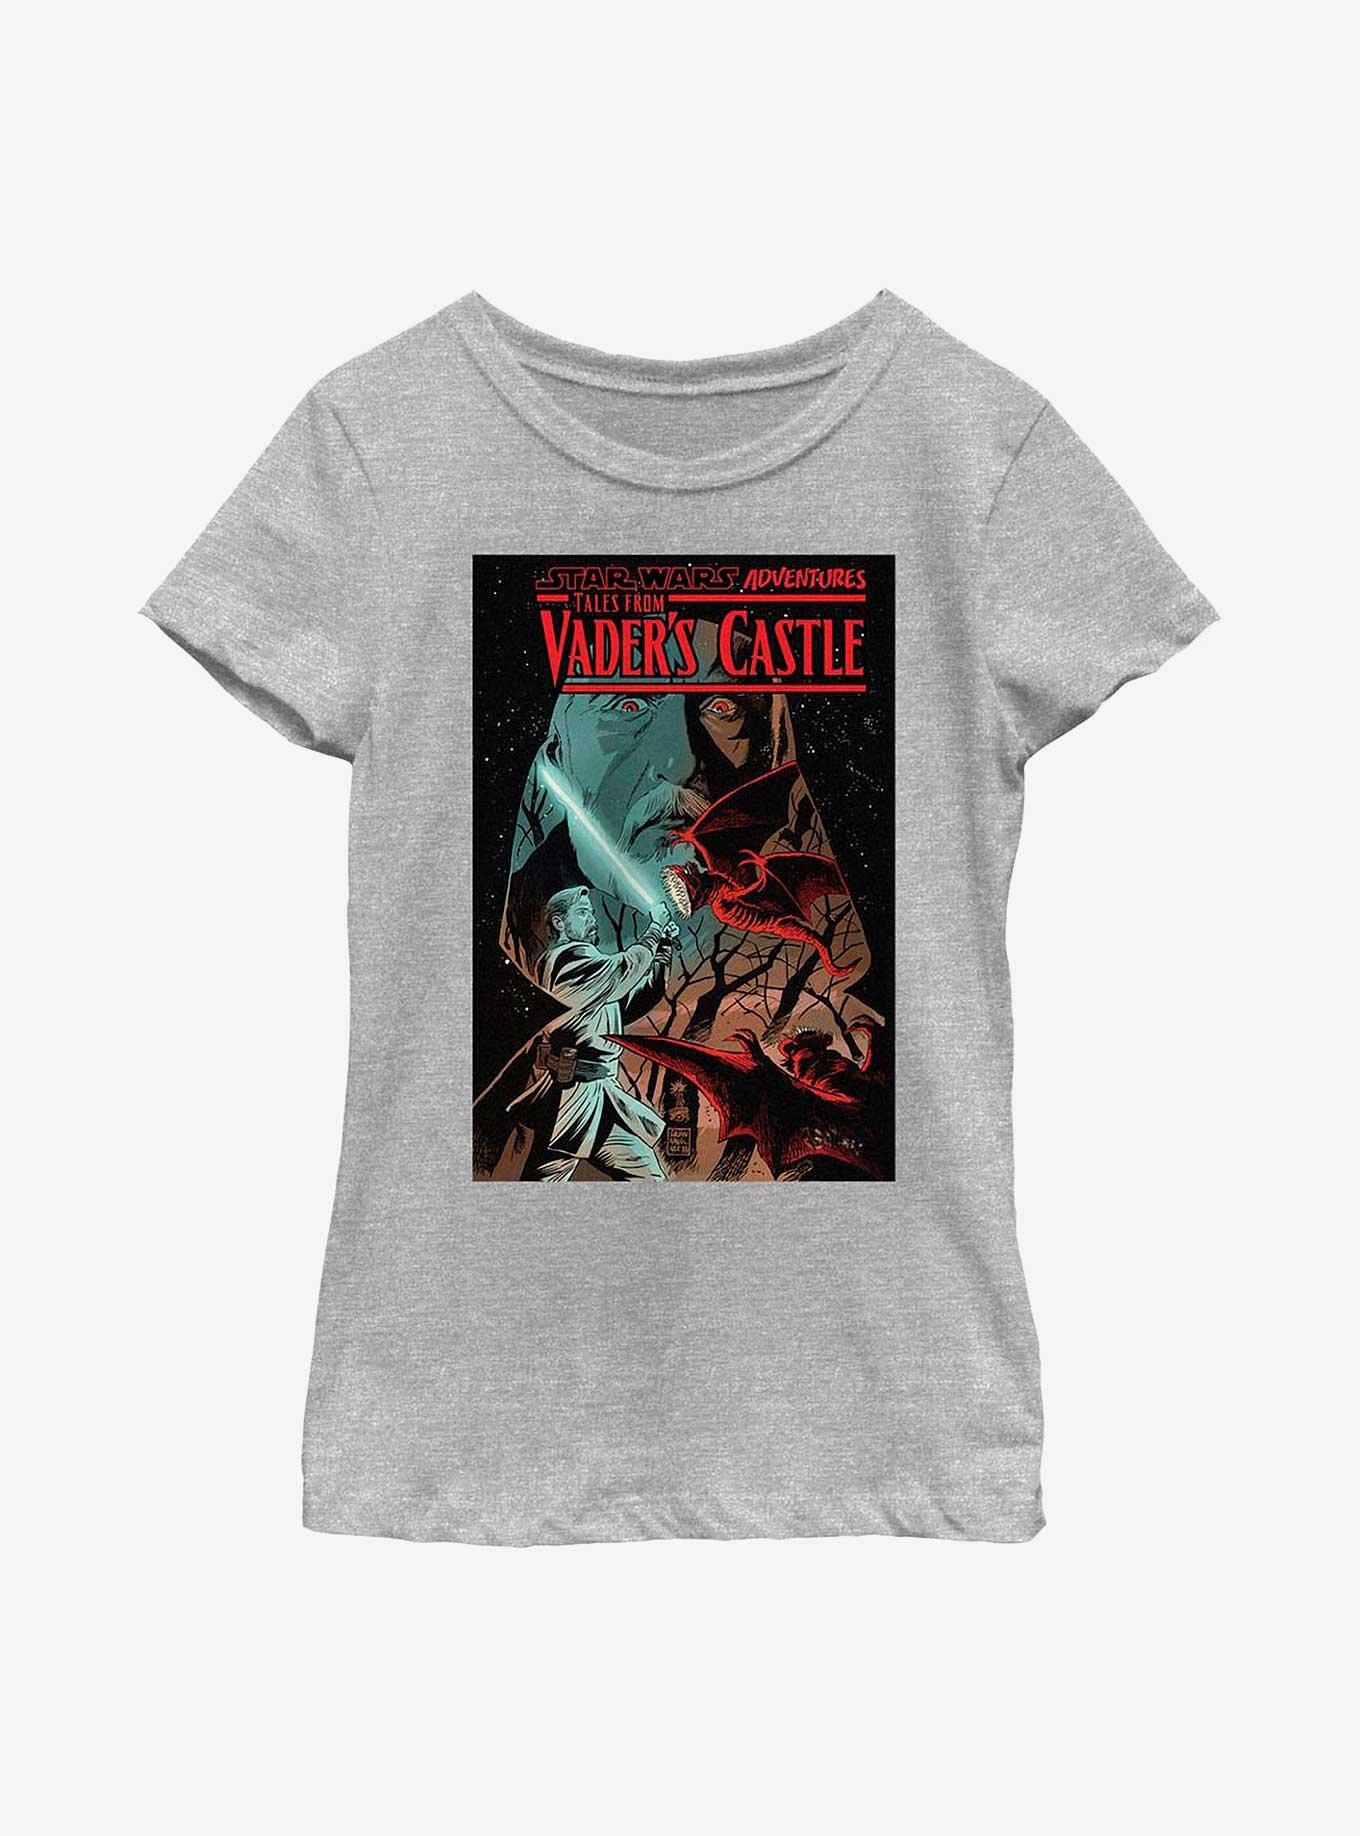 Star Wars Saber Tales From Vader's Castle Youth Girls T-Shirt, , hi-res